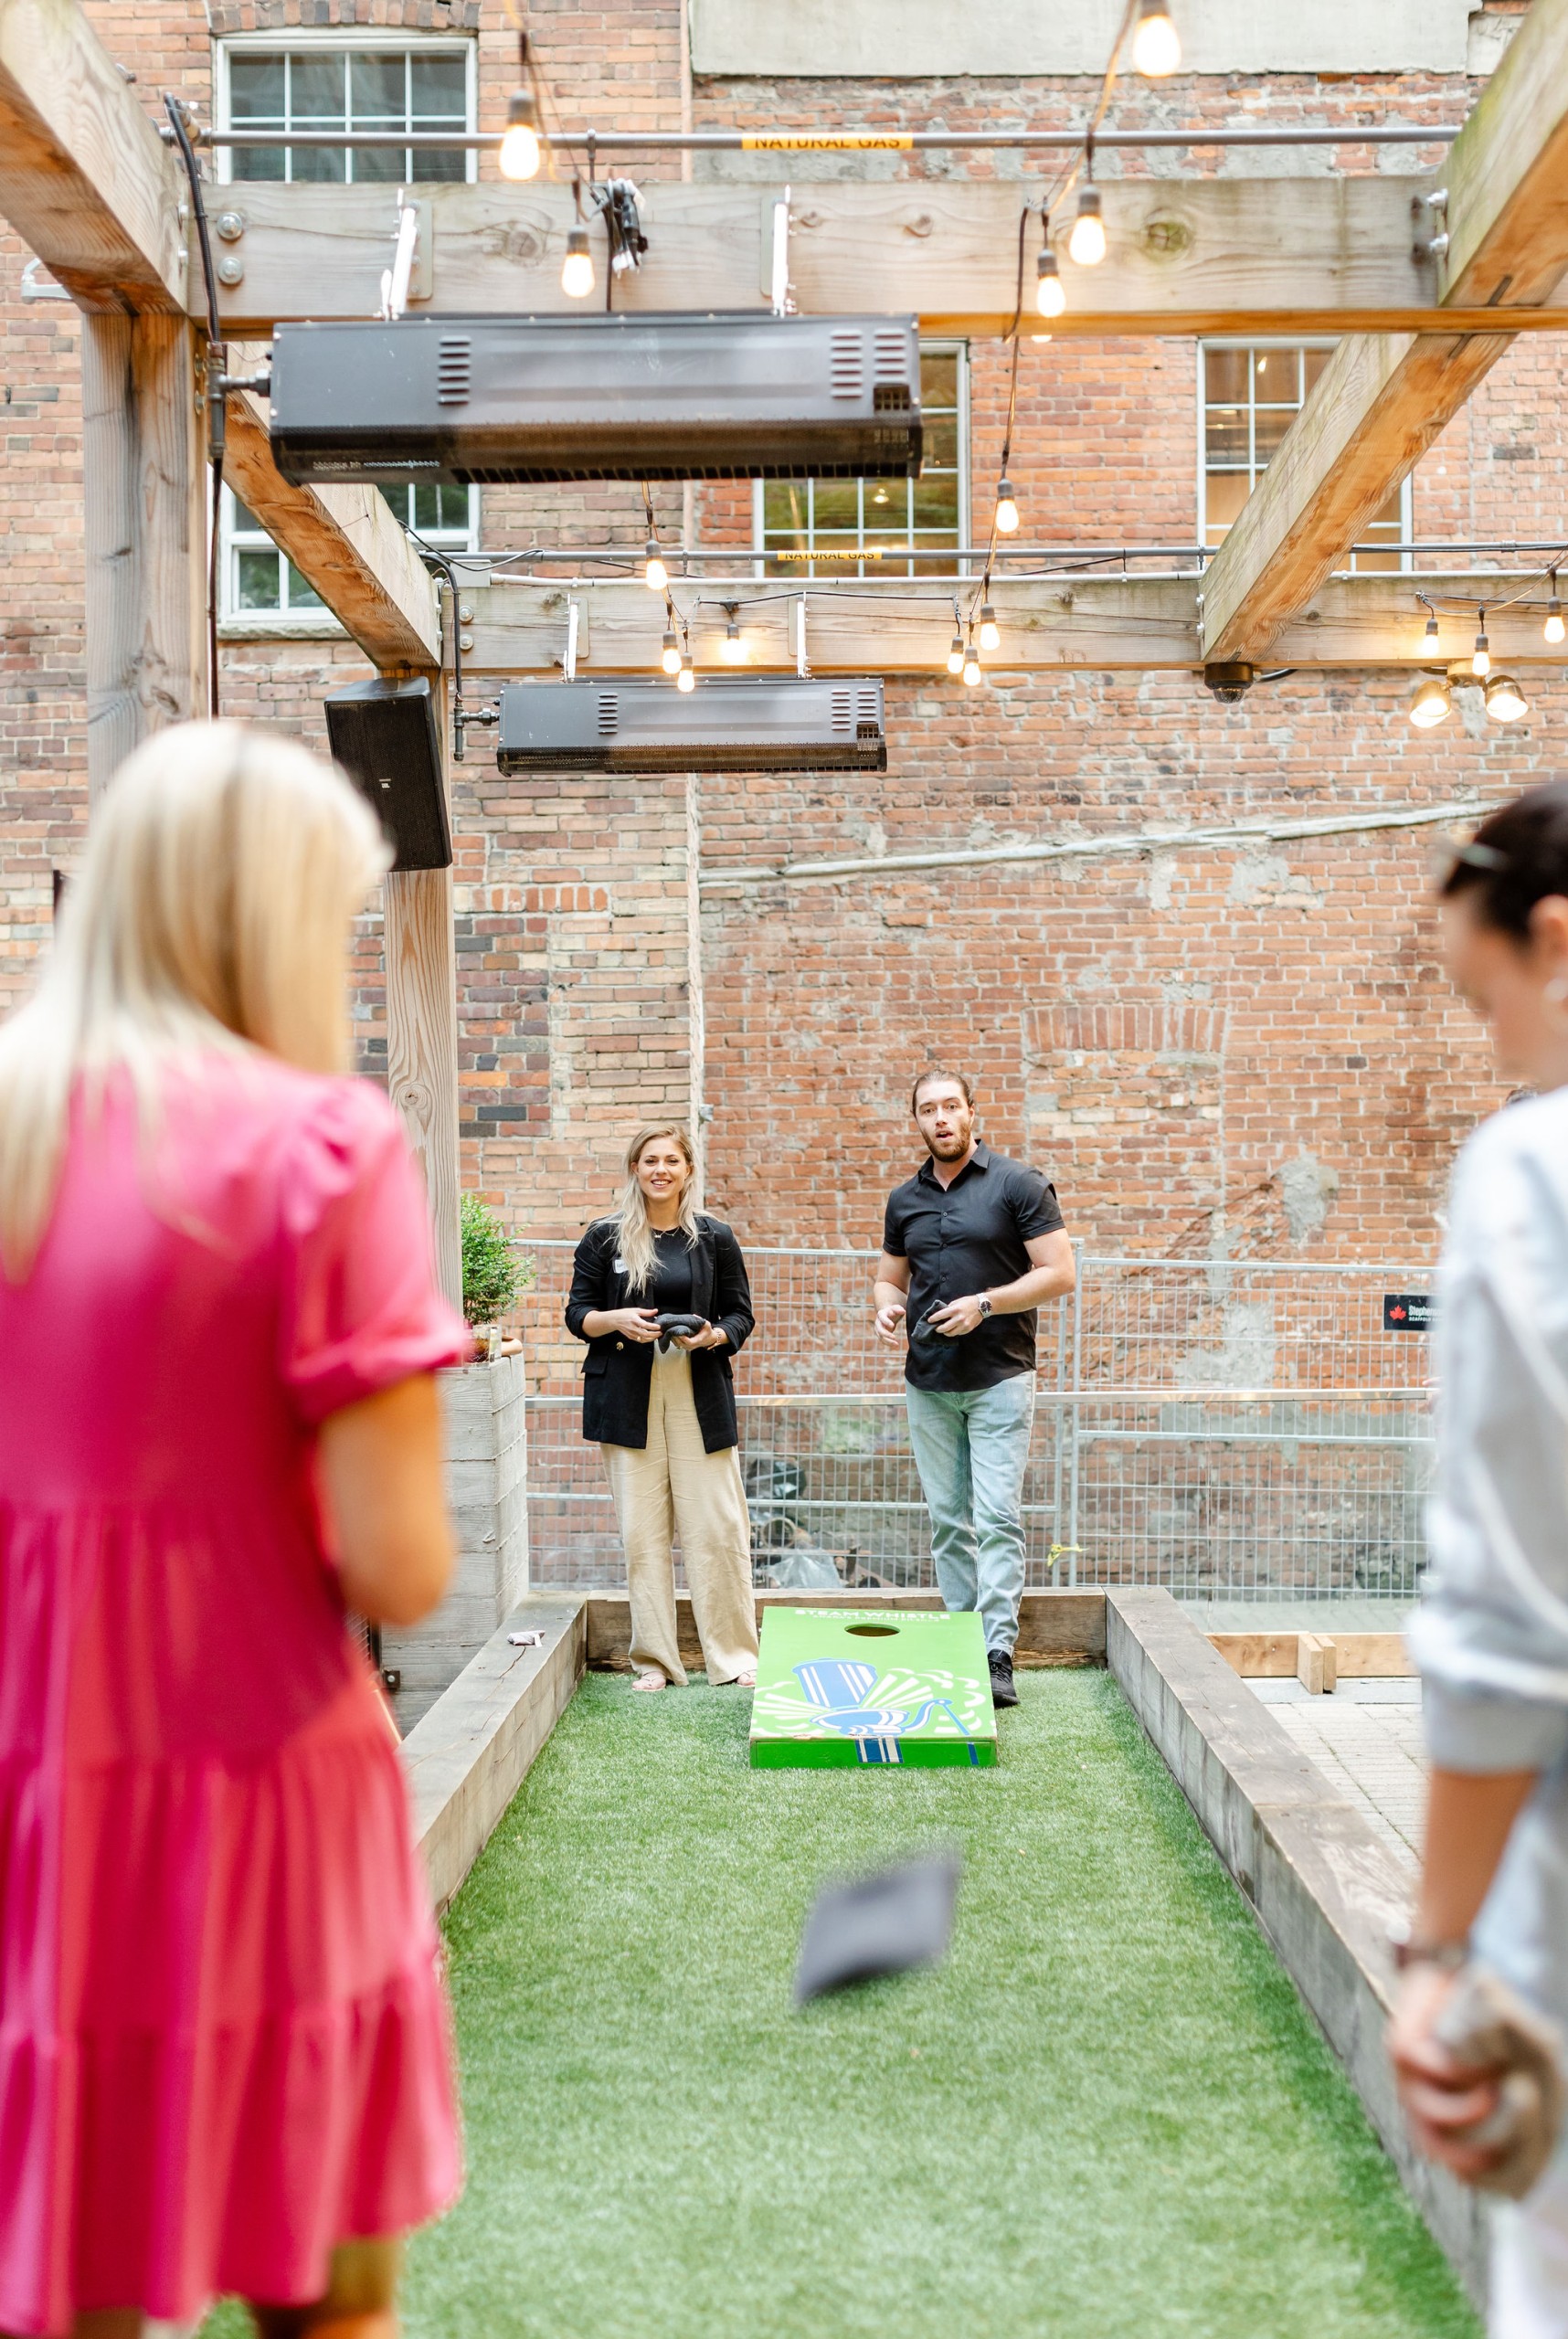 Social event featuring people playing cornhole.